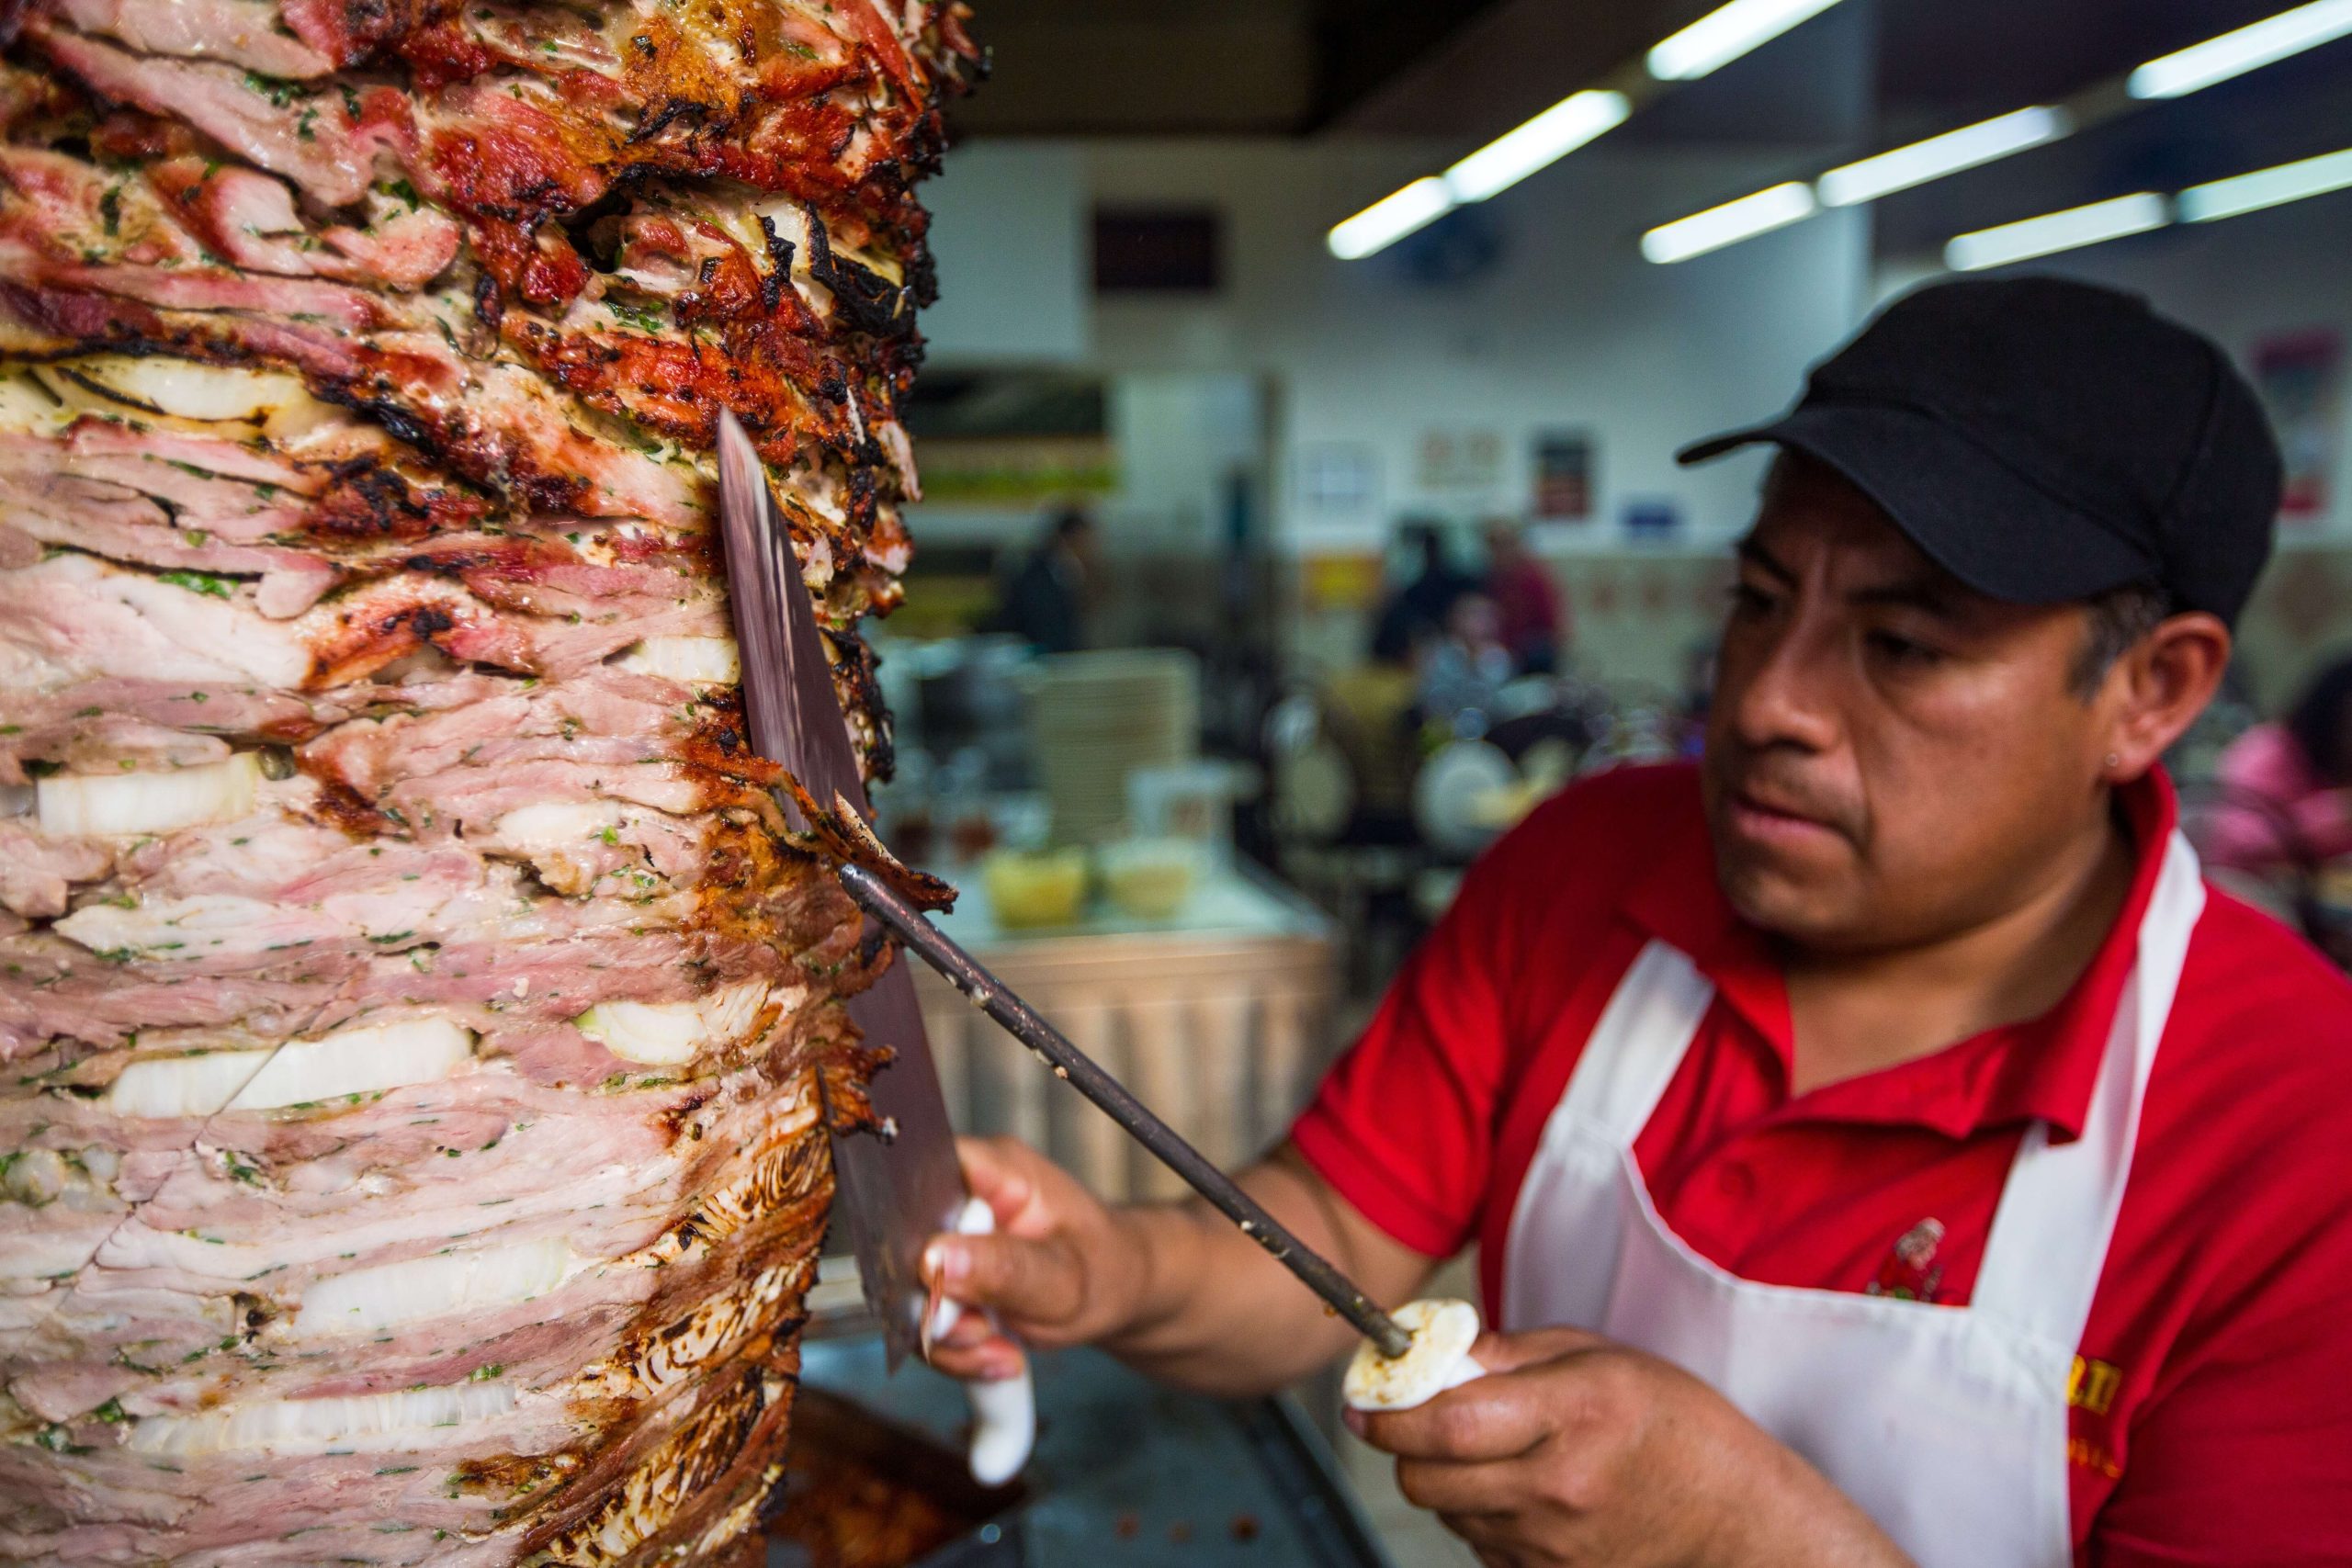 What is Suadero meat?